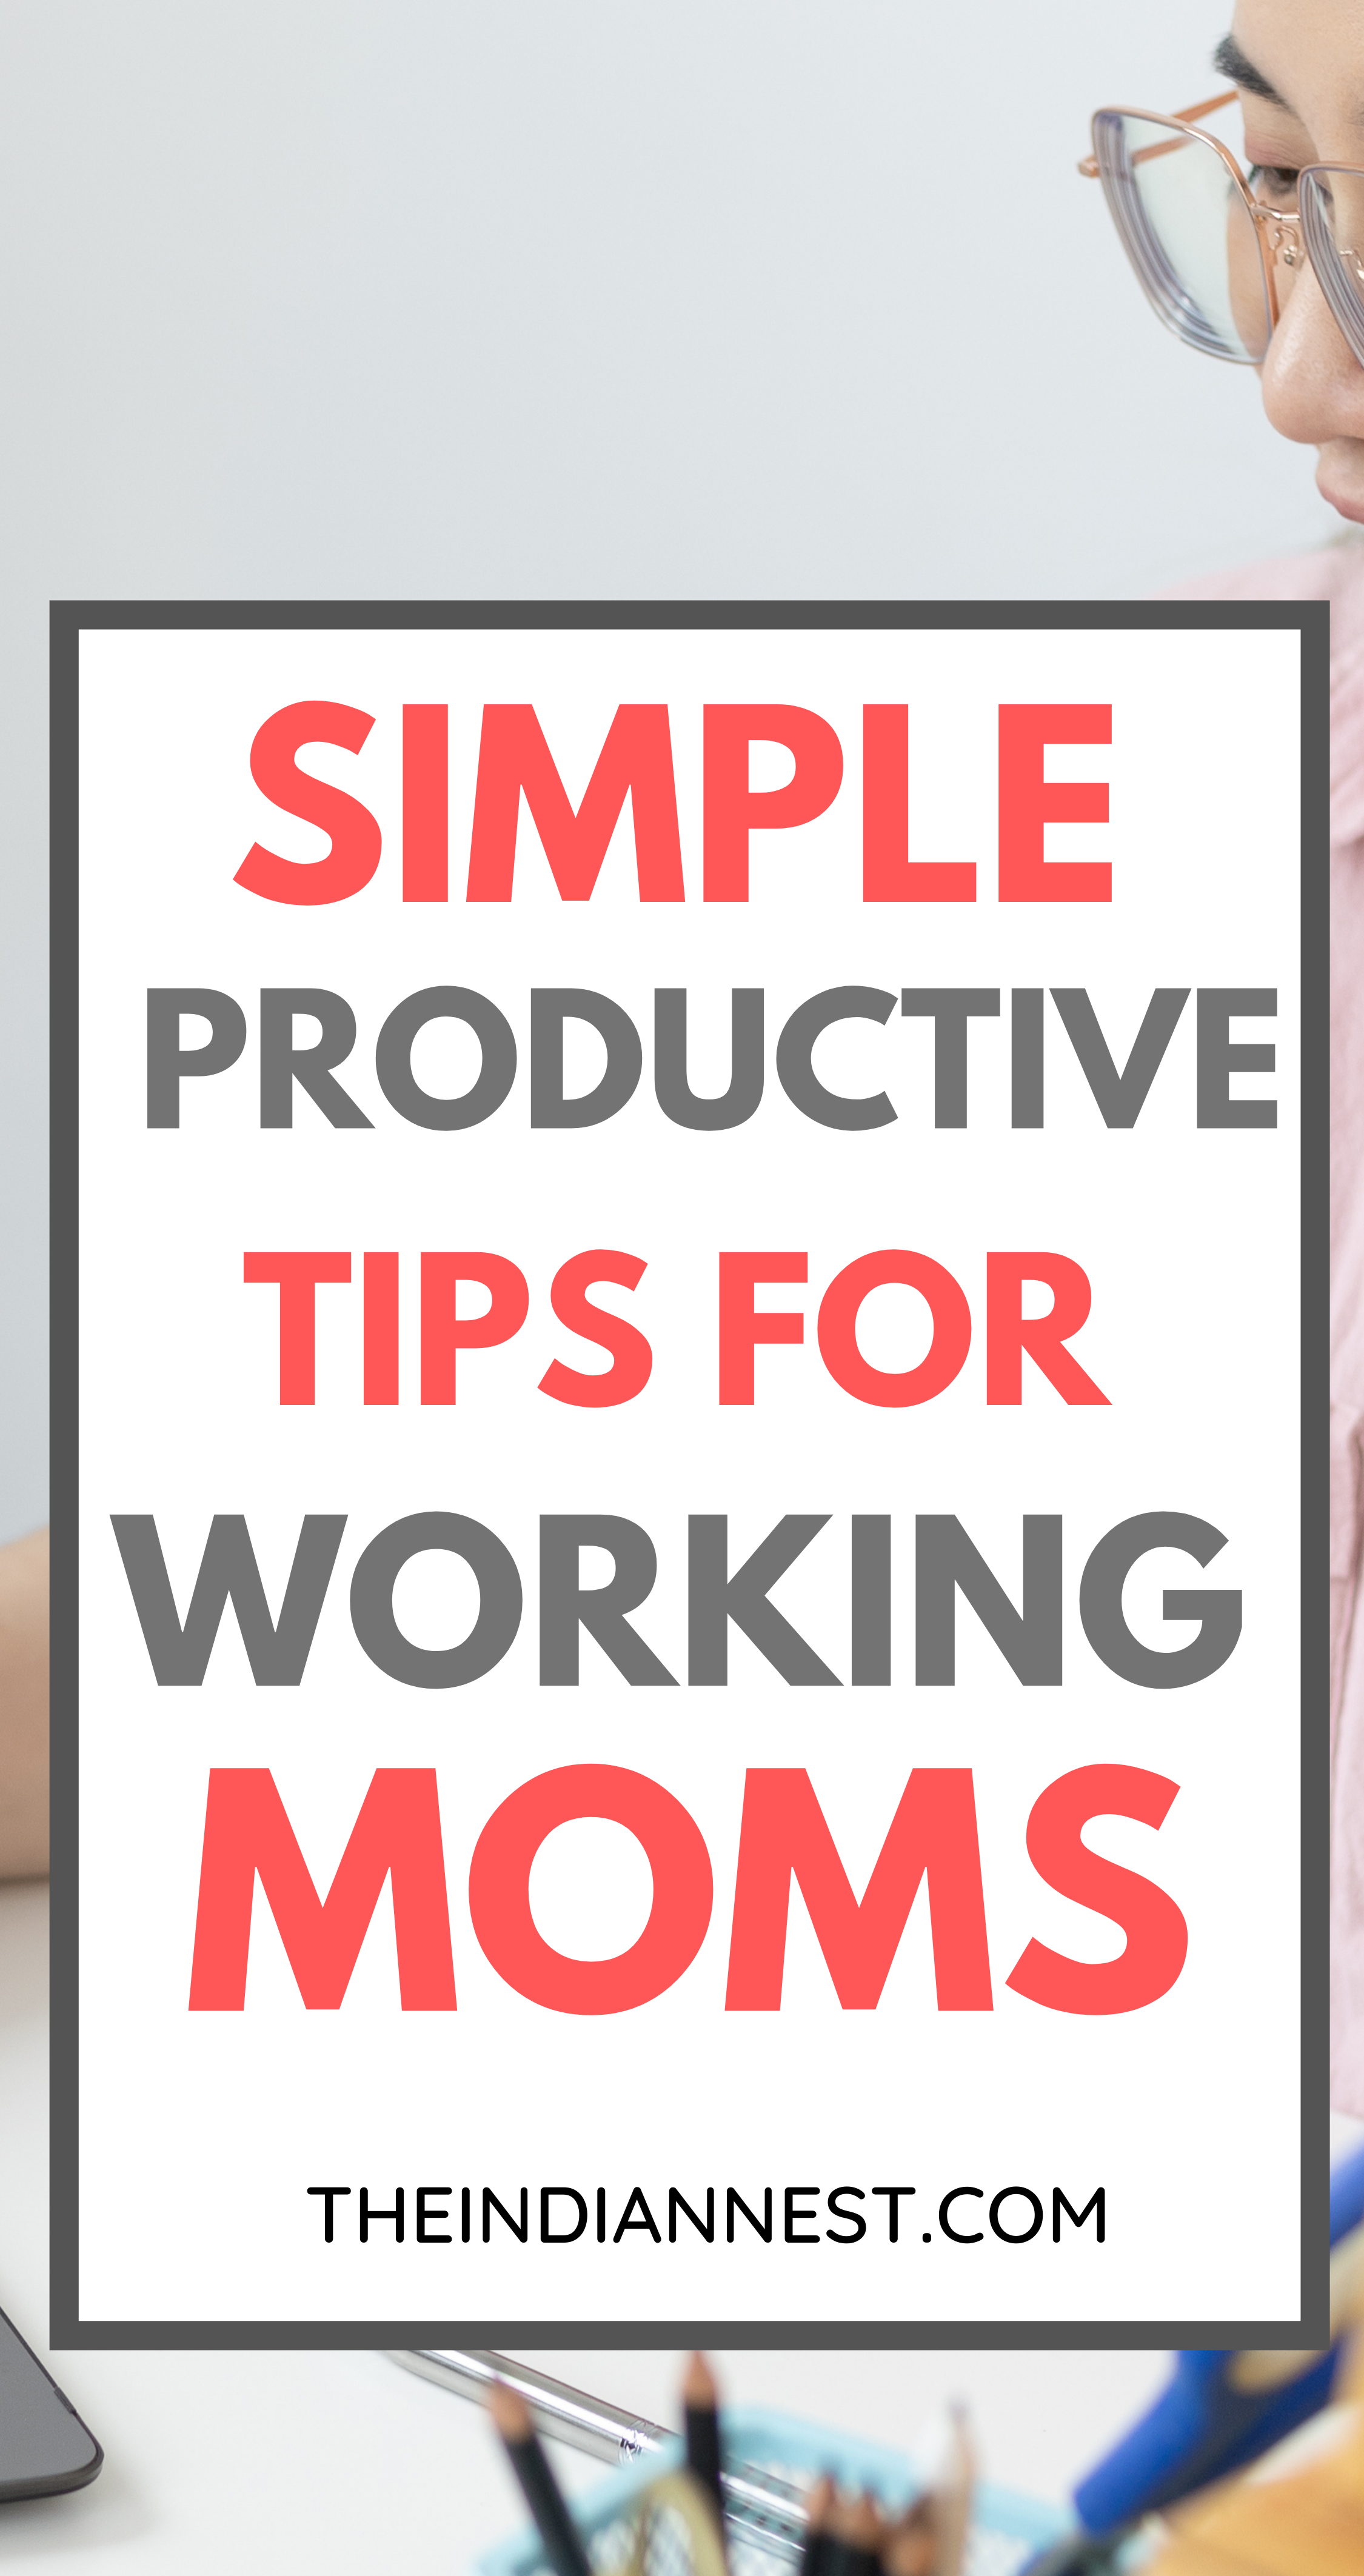 Productivity Tips for Working Moms and Mompreneurs.  I have learned a few things over the years to help me stay more organized and get more of the right things accomplished each day.